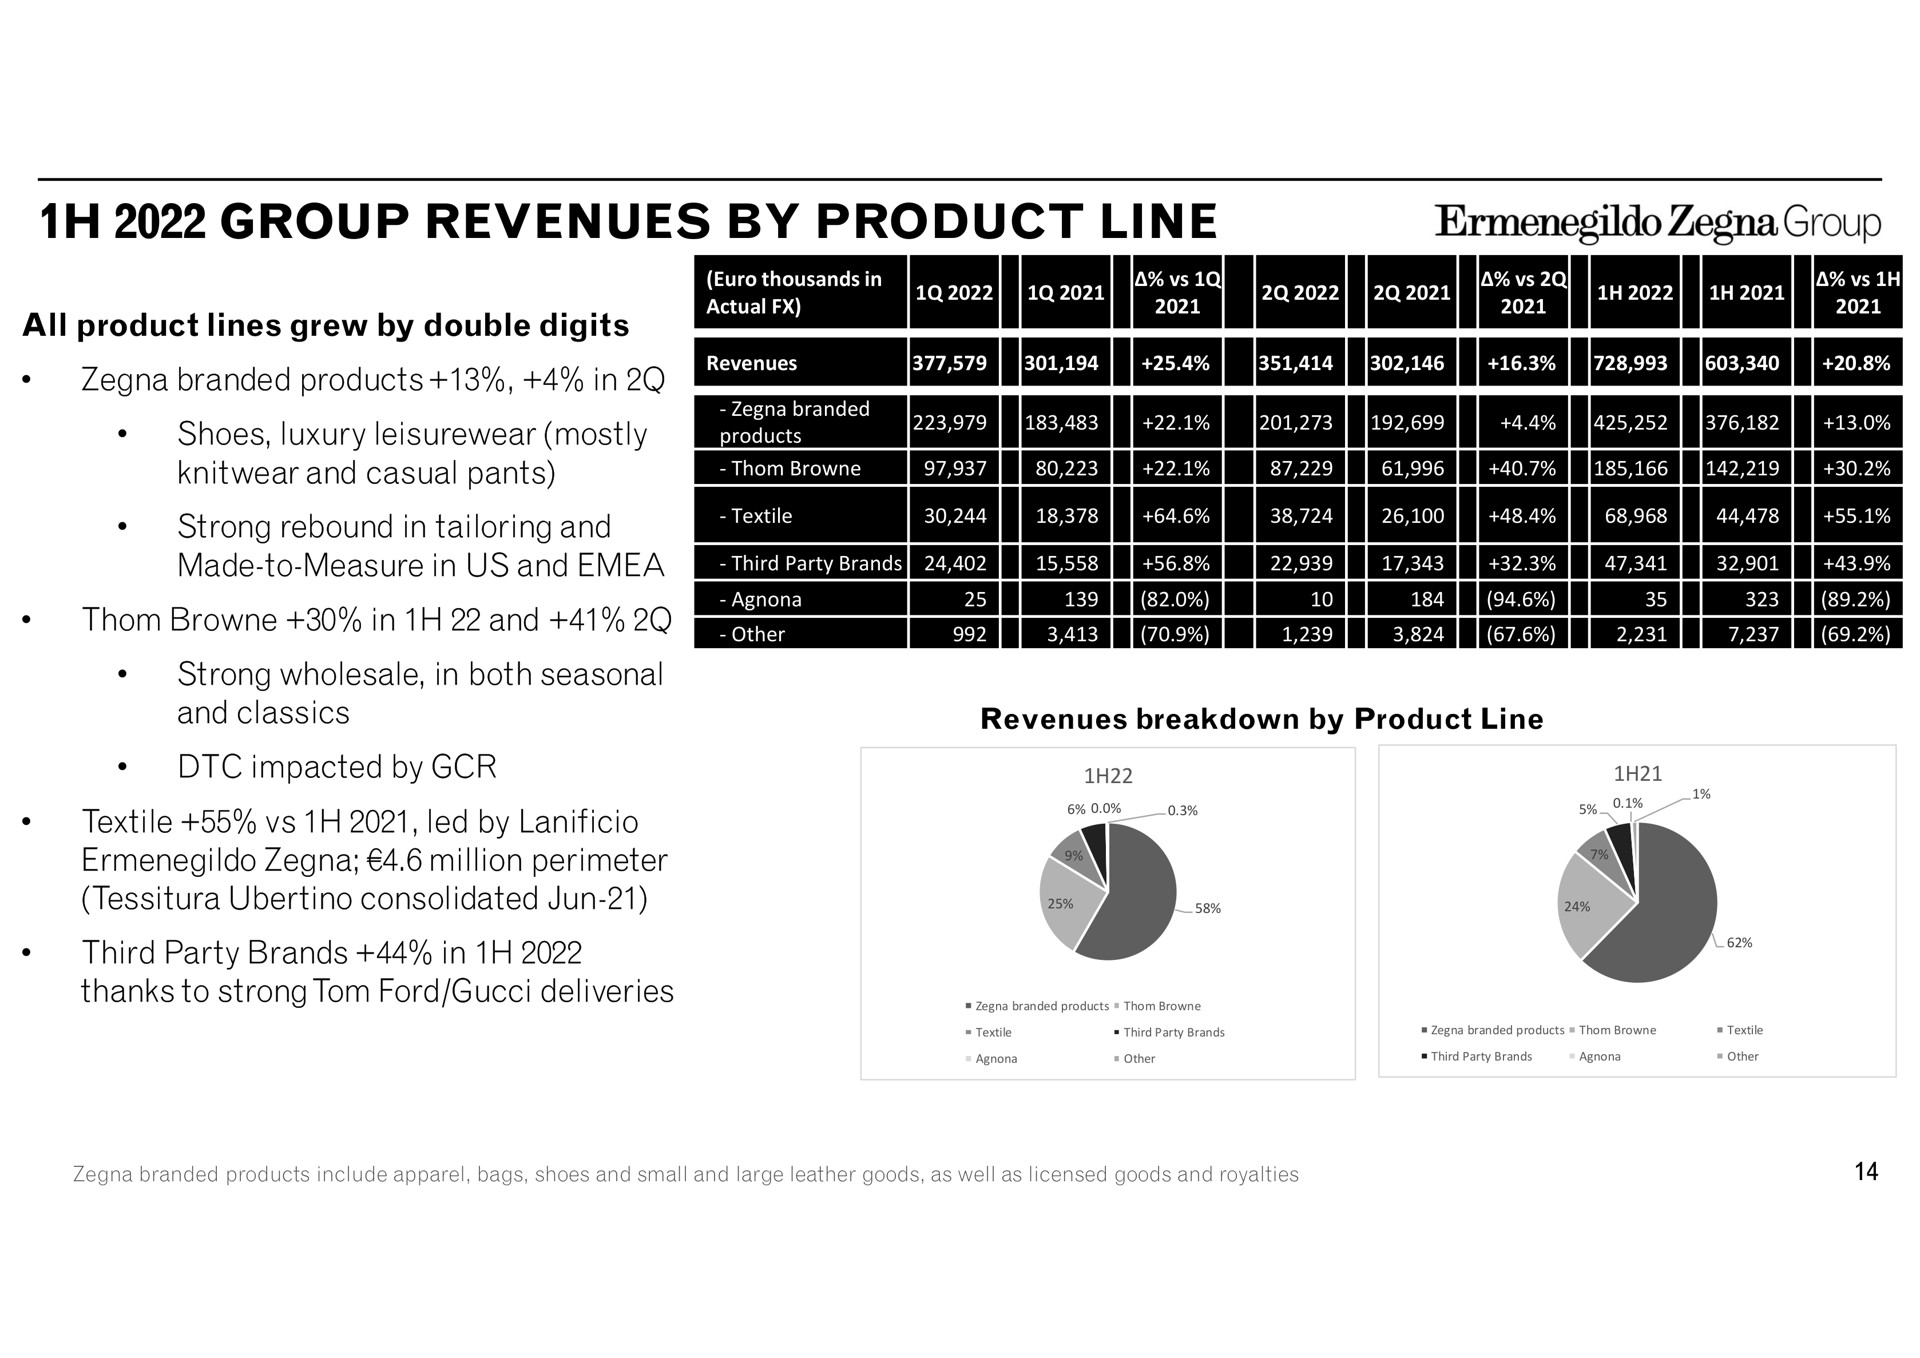 group revenues by product line all product lines grew by double digits branded products in shoes luxury mostly knitwear and casual pants strong rebound in tailoring and made to measure in us and in and strong wholesale in both seasonal and classics impacted by textile led by million perimeter consolidated third party brands in thanks to strong ford deliveries inn thousands actual at a a yaya fae sires gee eer a teer can breakdown a sax me other other include apparel bags small large leather goods as well as licensed goods royalties | Zegna